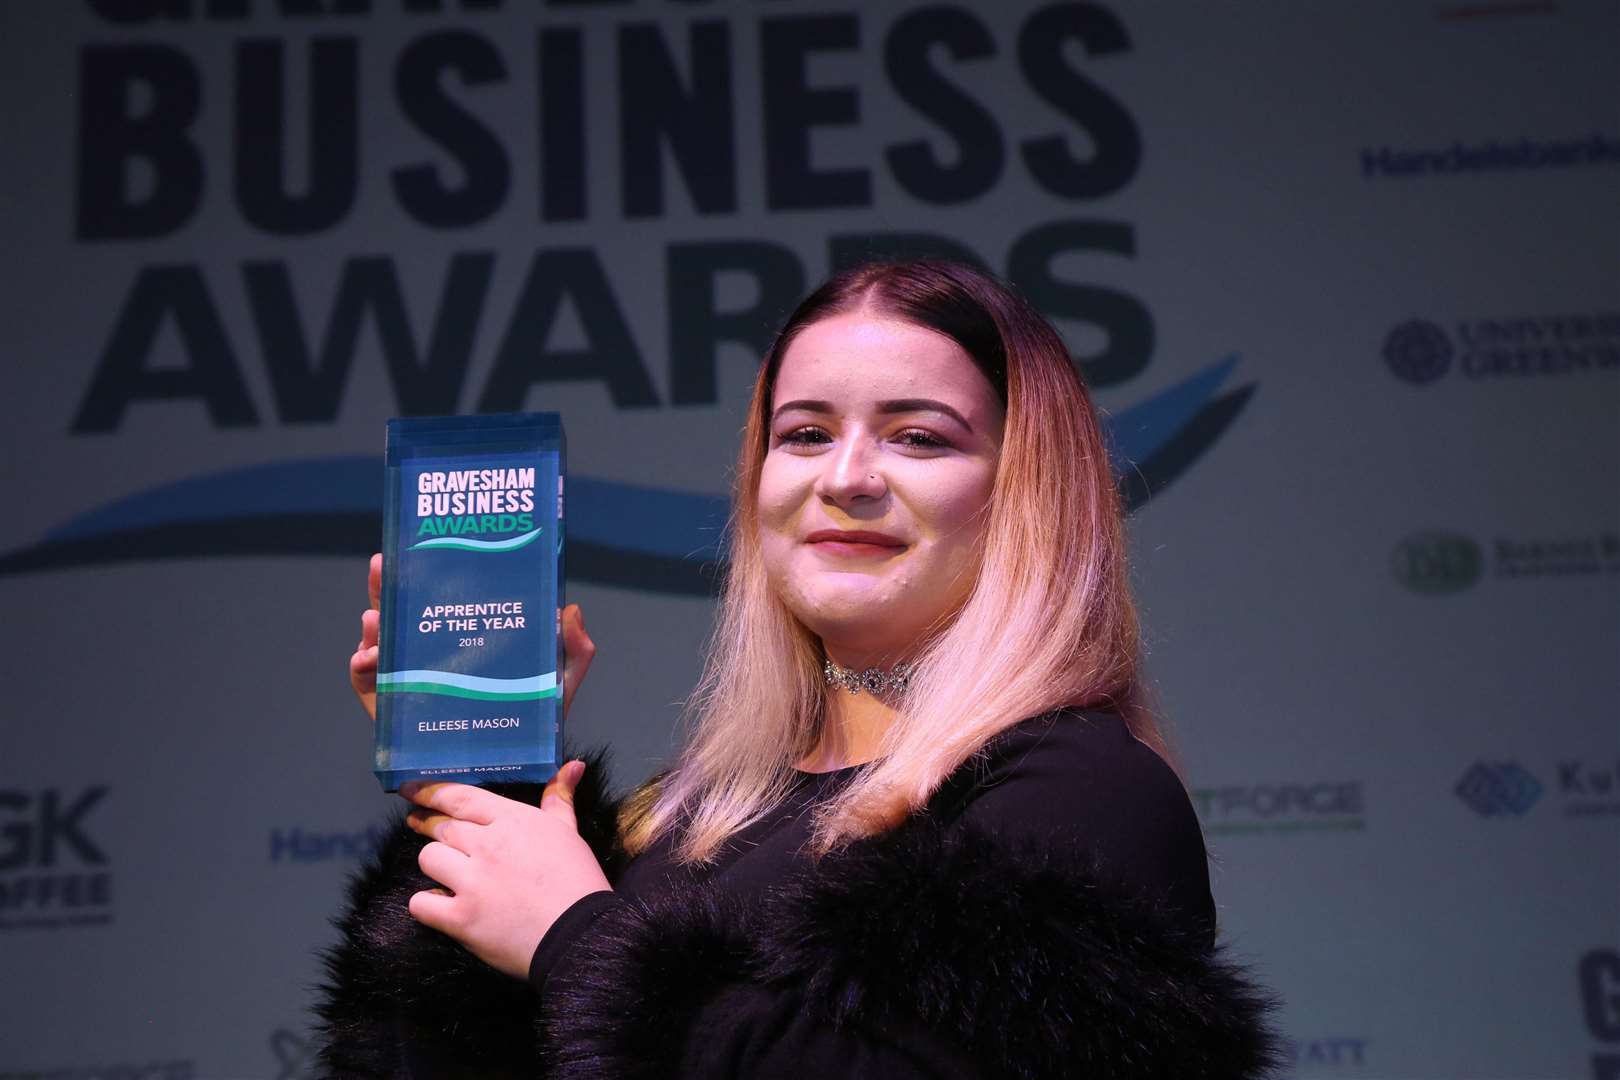 Apprentice of the Year Elleese Mason of Orange Property Services